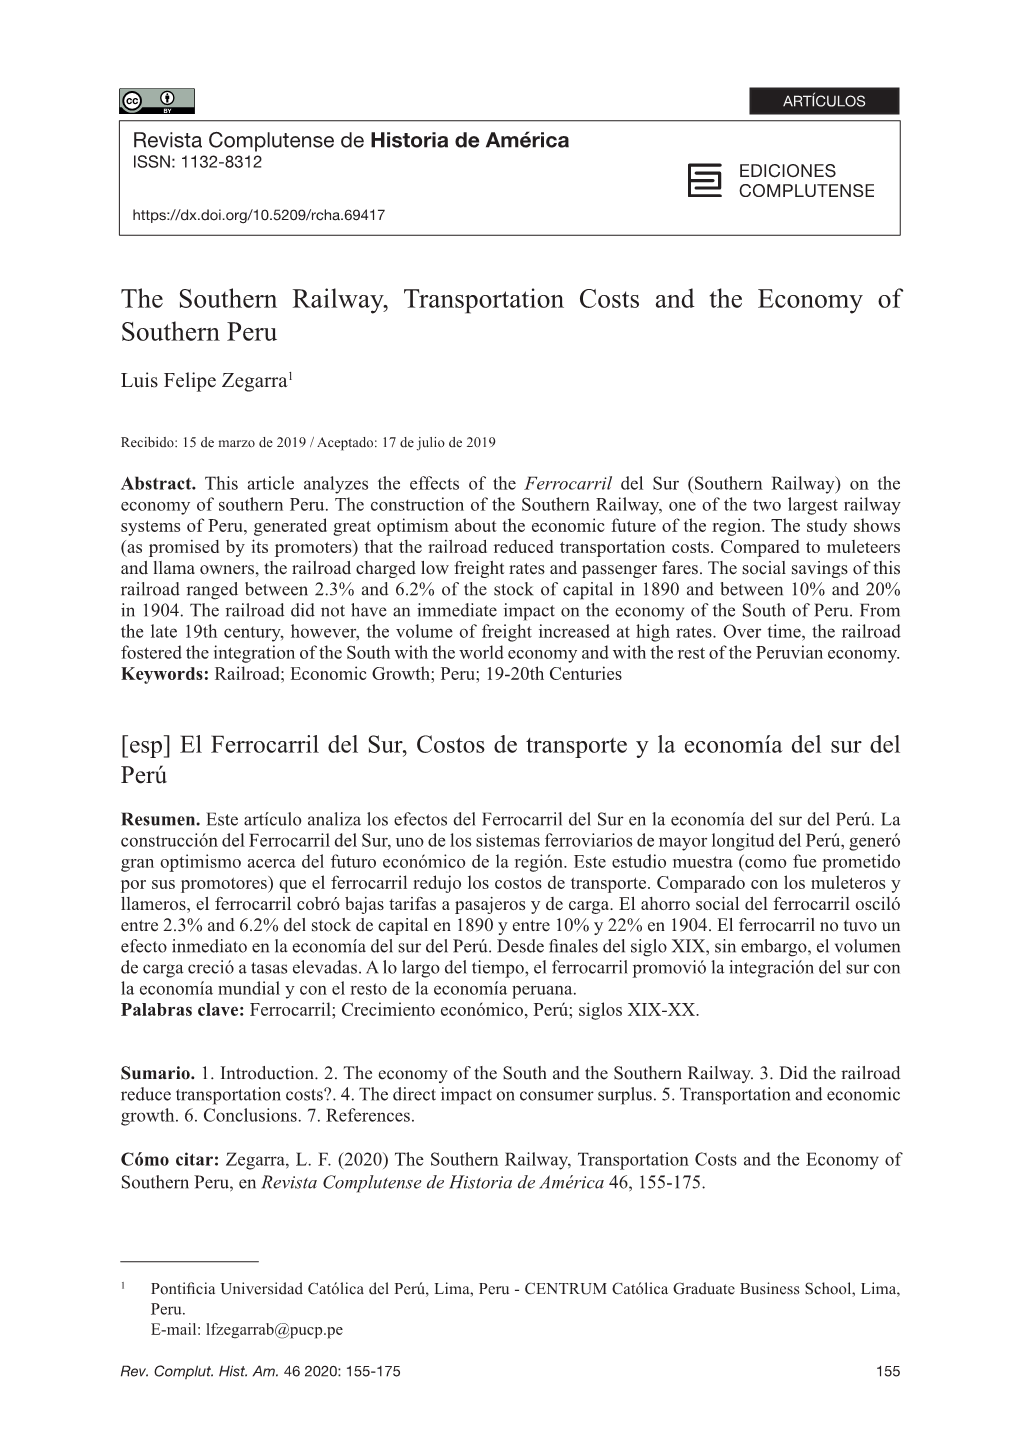 The Southern Railway, Transportation Costs and the Economy of Southern Peru